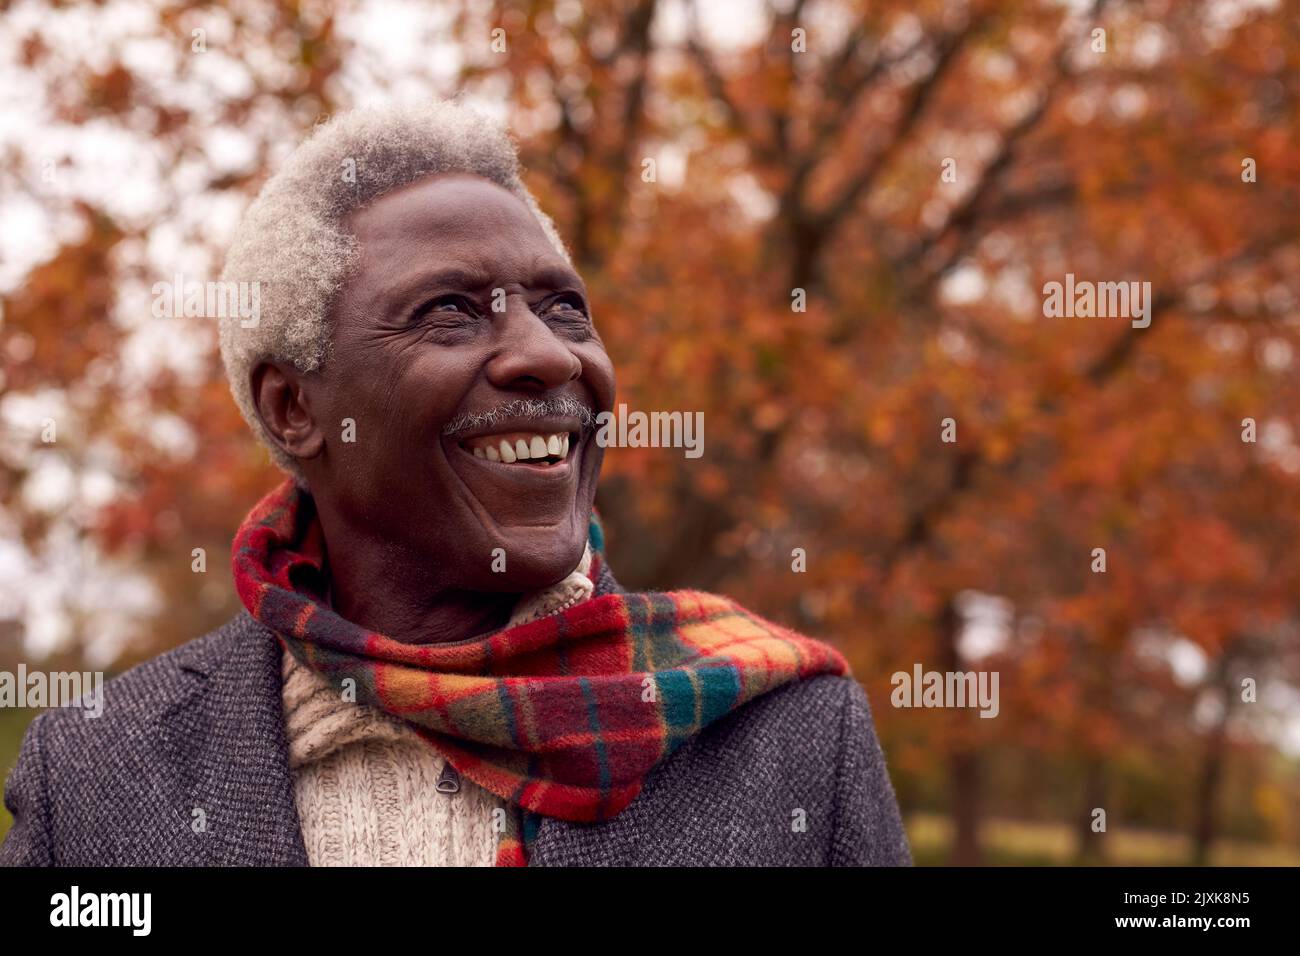 Head And Shoulders Portrait Of Senior Man On Walk Through Autumn Countryside Against Golden Leaves Stock Photo